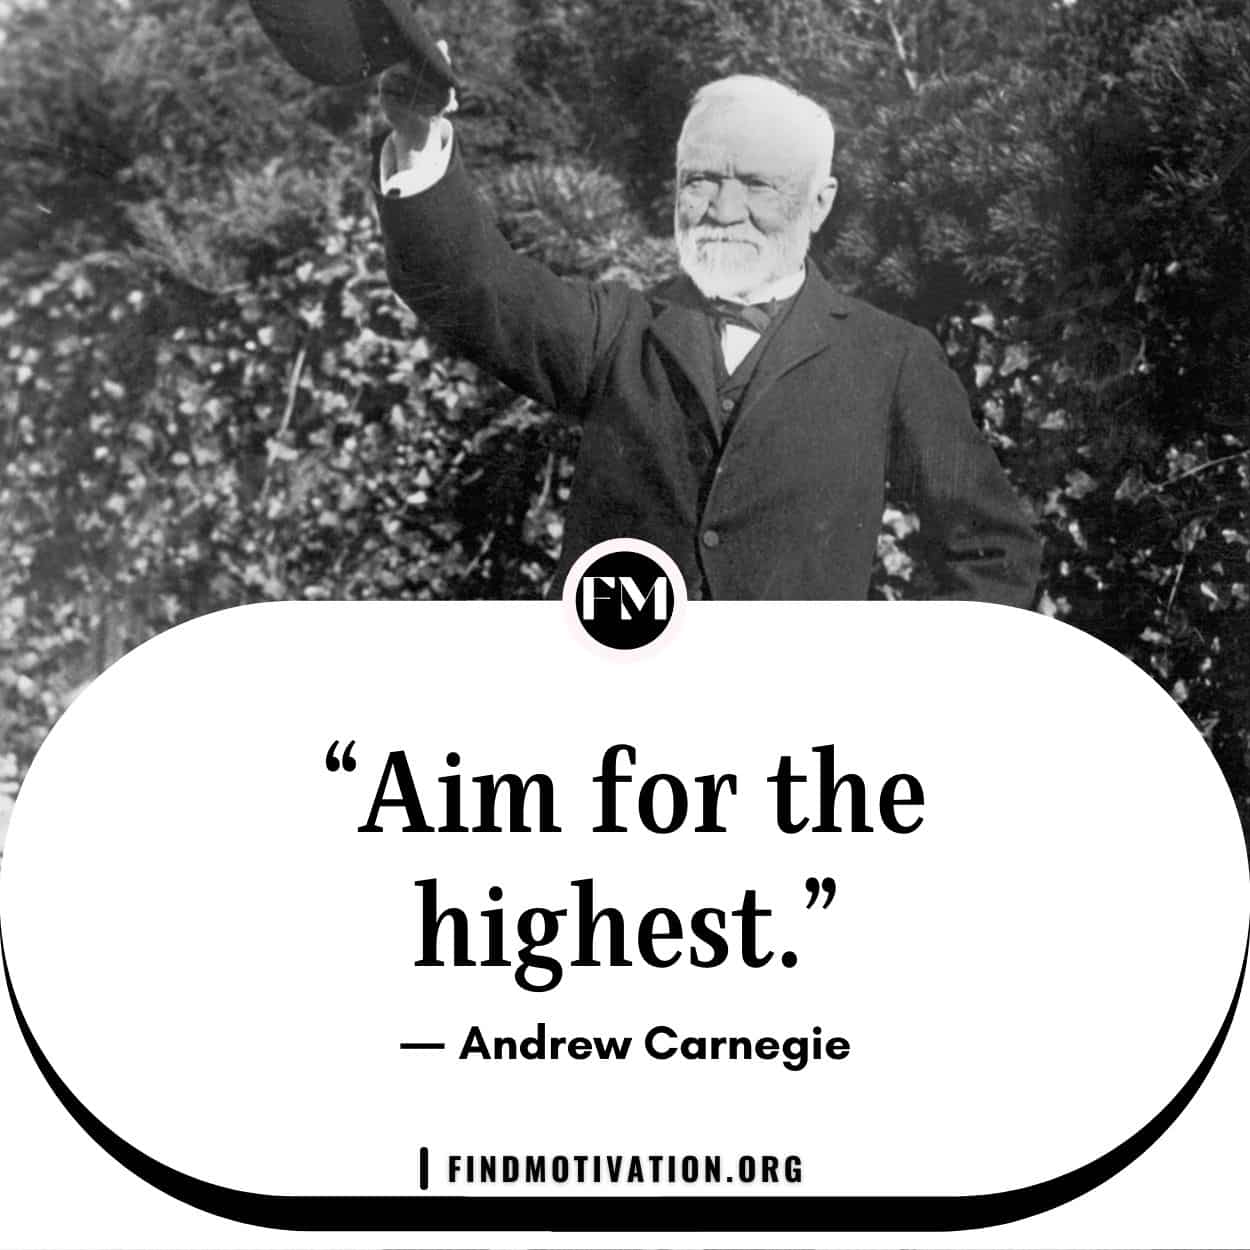 Andrew Carnegie Inspiring Quotes to aim higher in your life